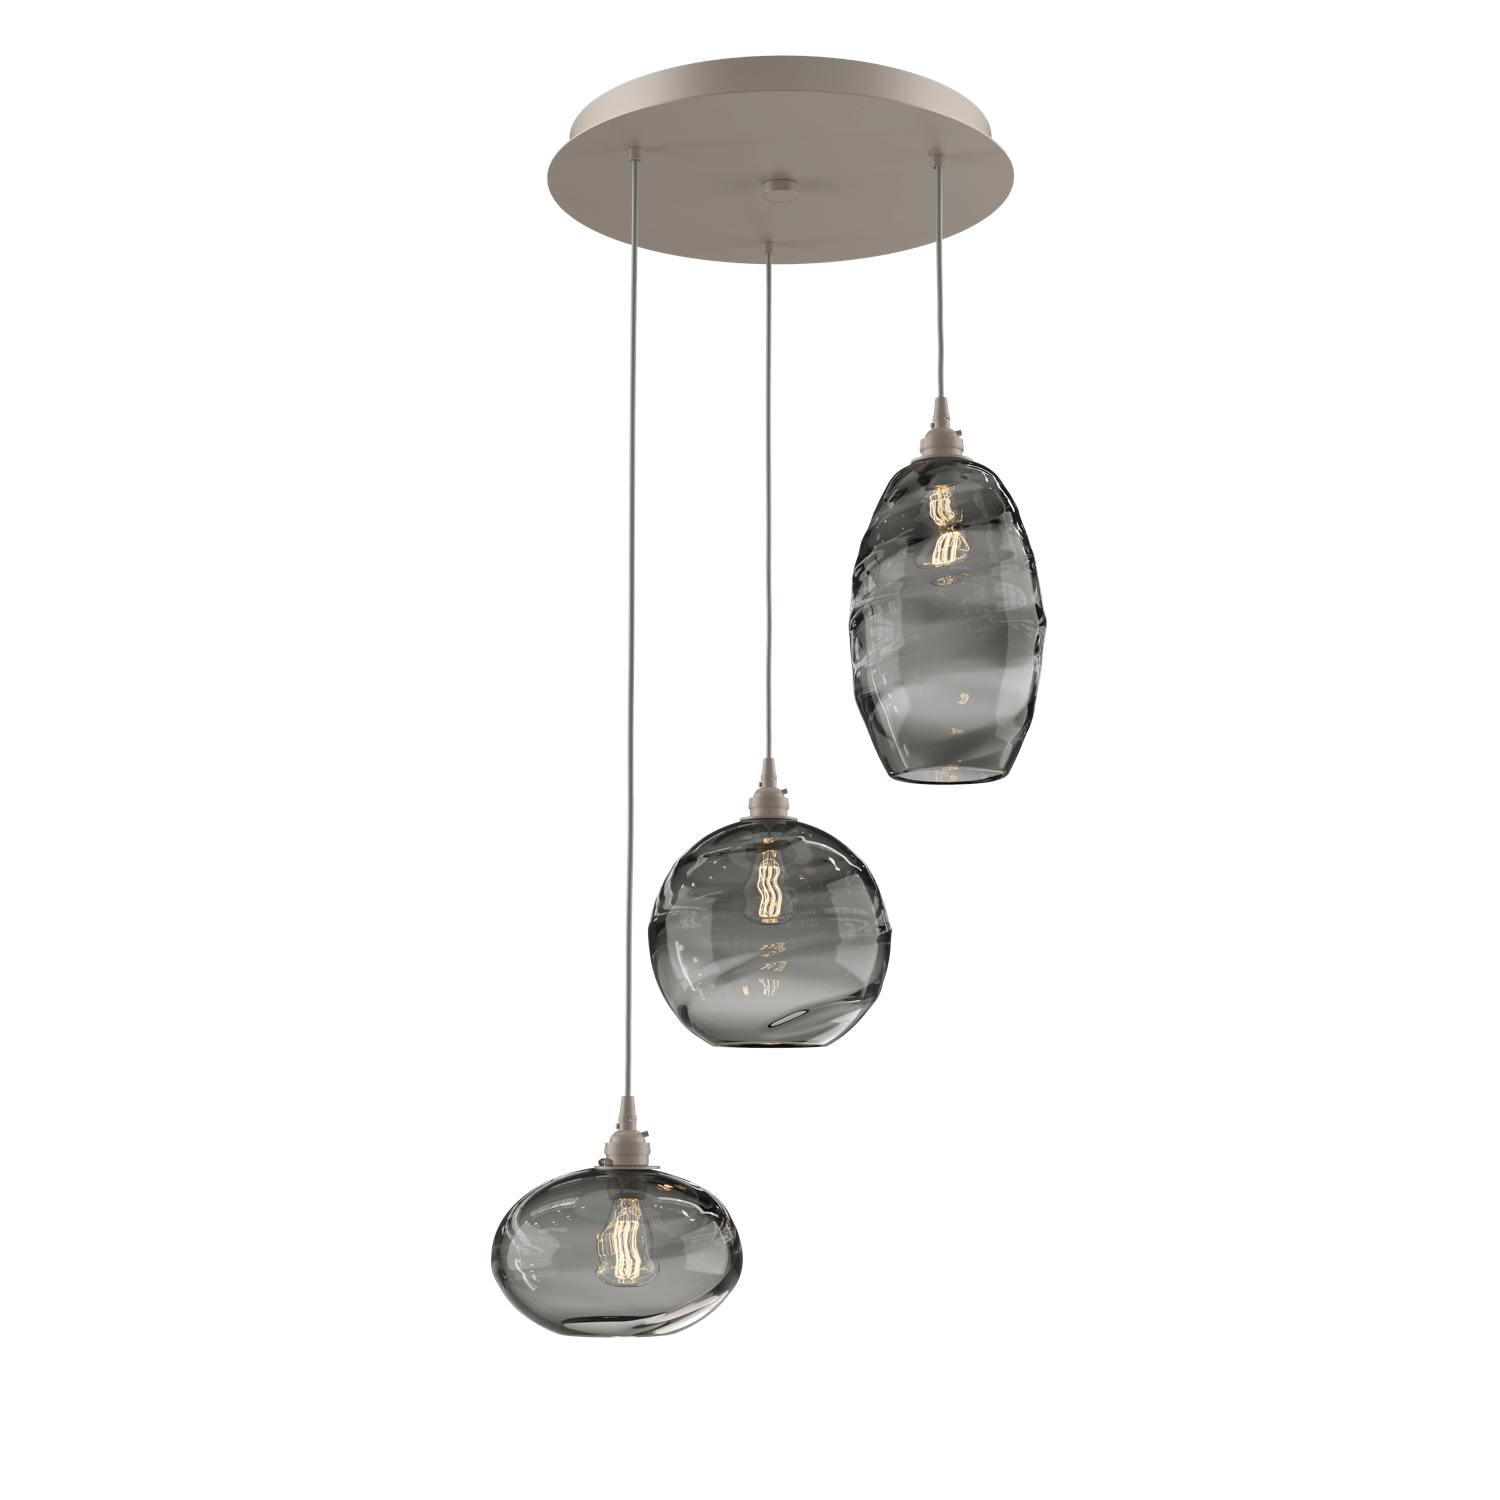 CHB0048-03-BS-OS-Hammerton-Studio-Optic-Blown-Glass-Misto-3-light-round-pendant-chandelier-with-metallic-beige-silver-finish-and-optic-smoke-blown-glass-shades-and-incandescent-lamping